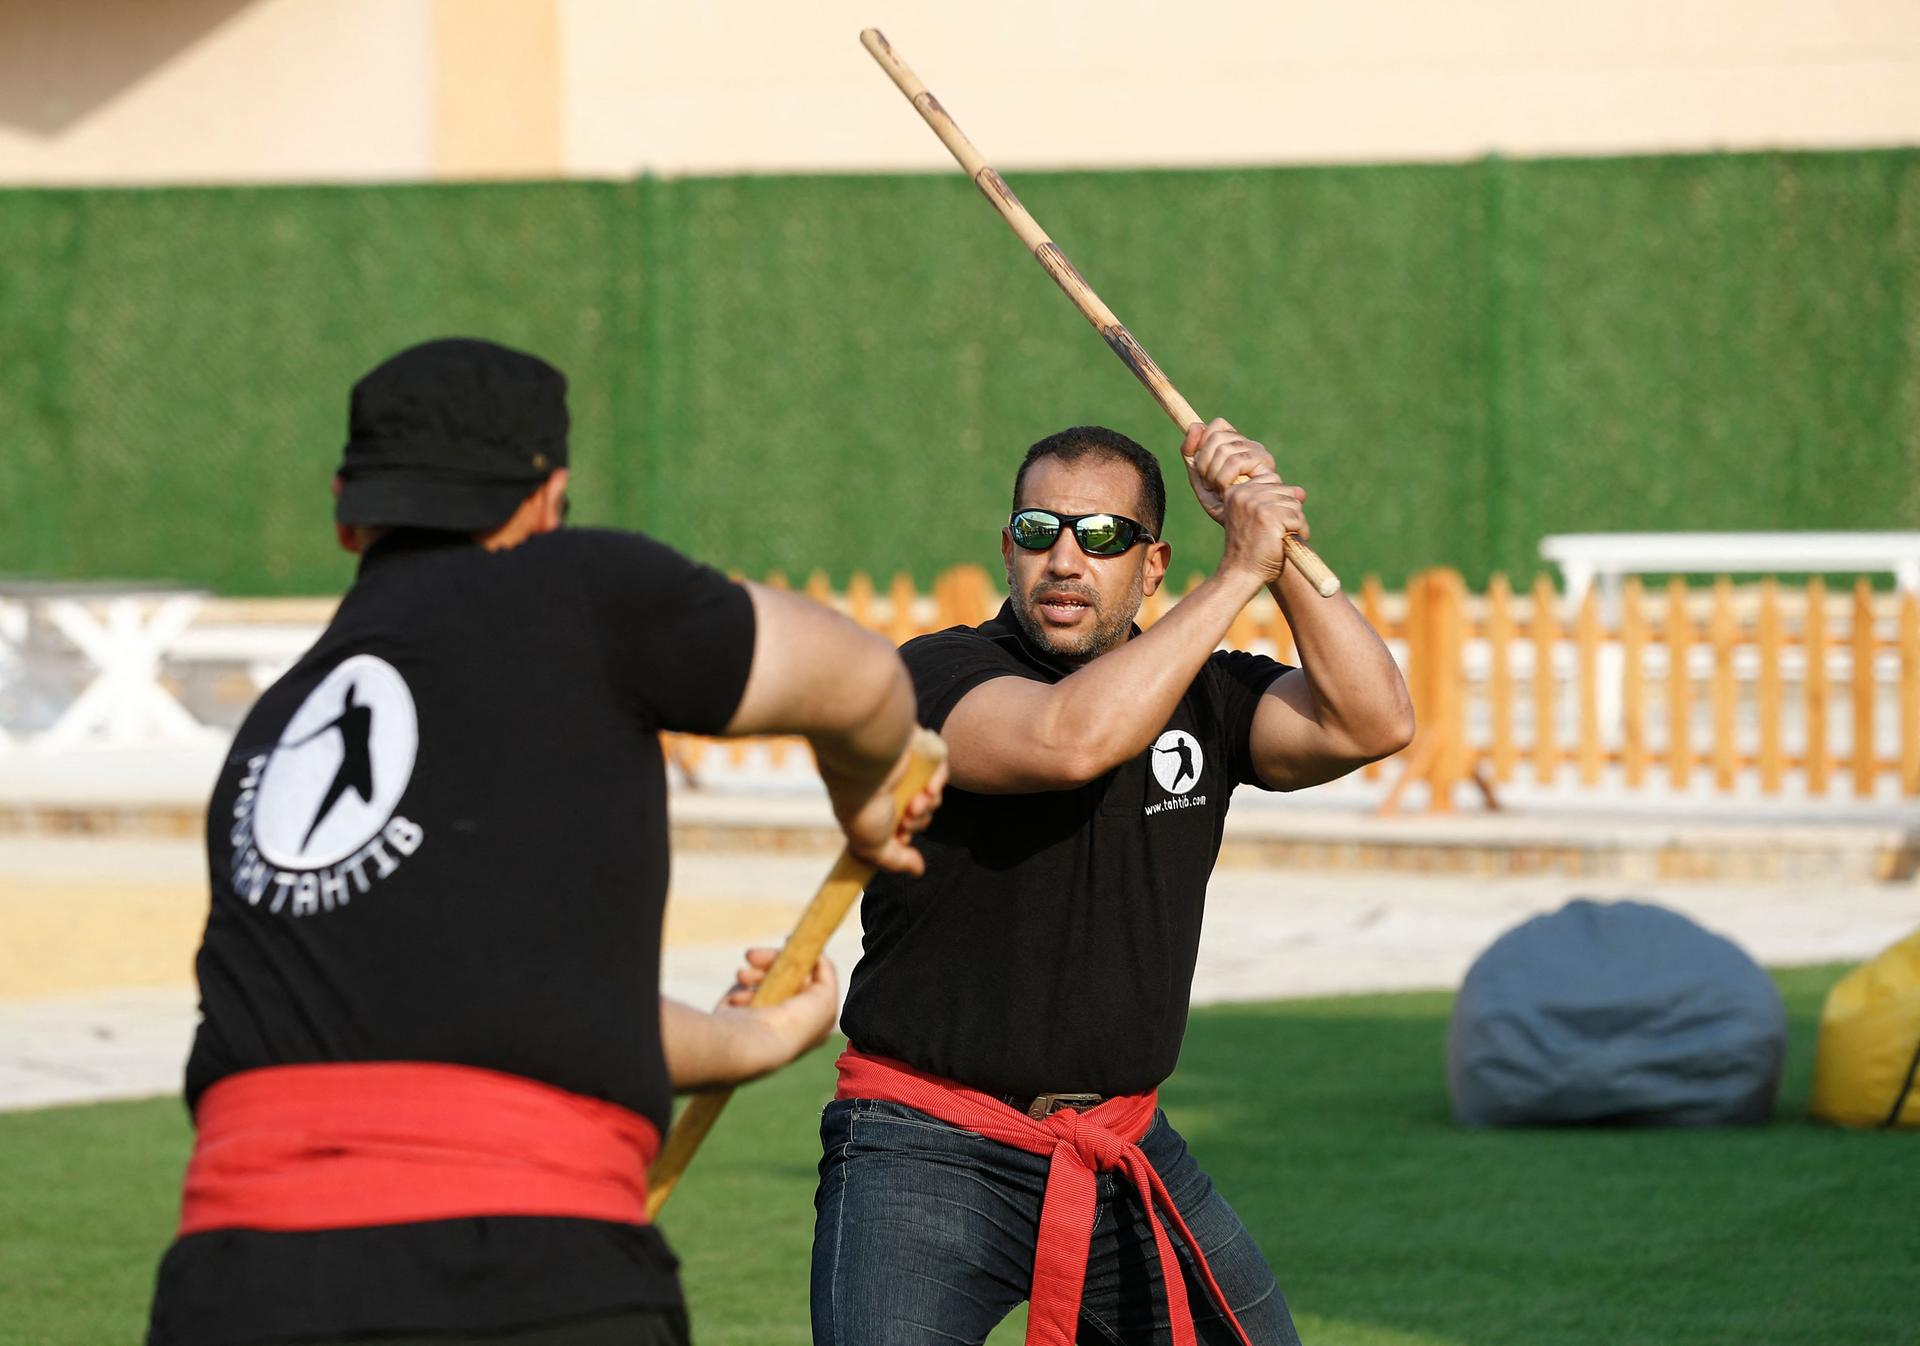 About - Stick Fighting Sport